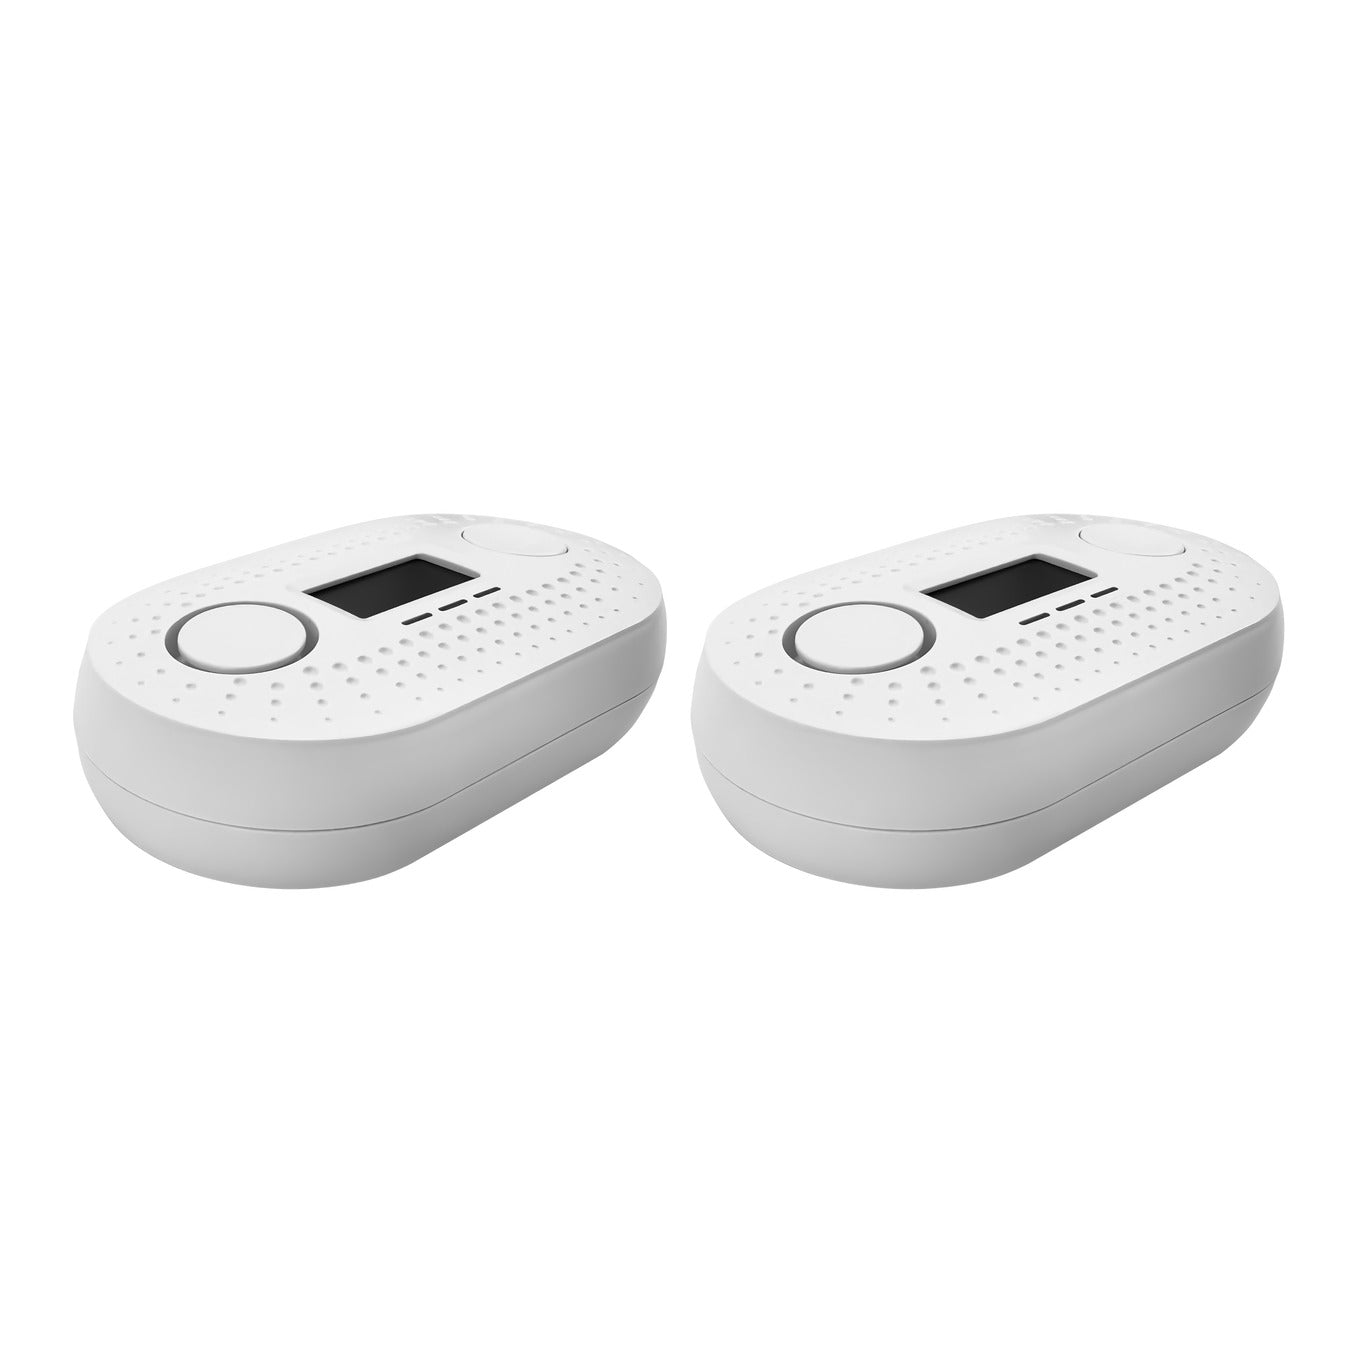 Two Pack - Firexo Interlinked Carbon Monoxide Alarm with 10 Year Tamper Proof Battery, can be interlinked with Firexo Smoke Alarm and Firexo Heat Alarm (sold separately), CO alarm, White.